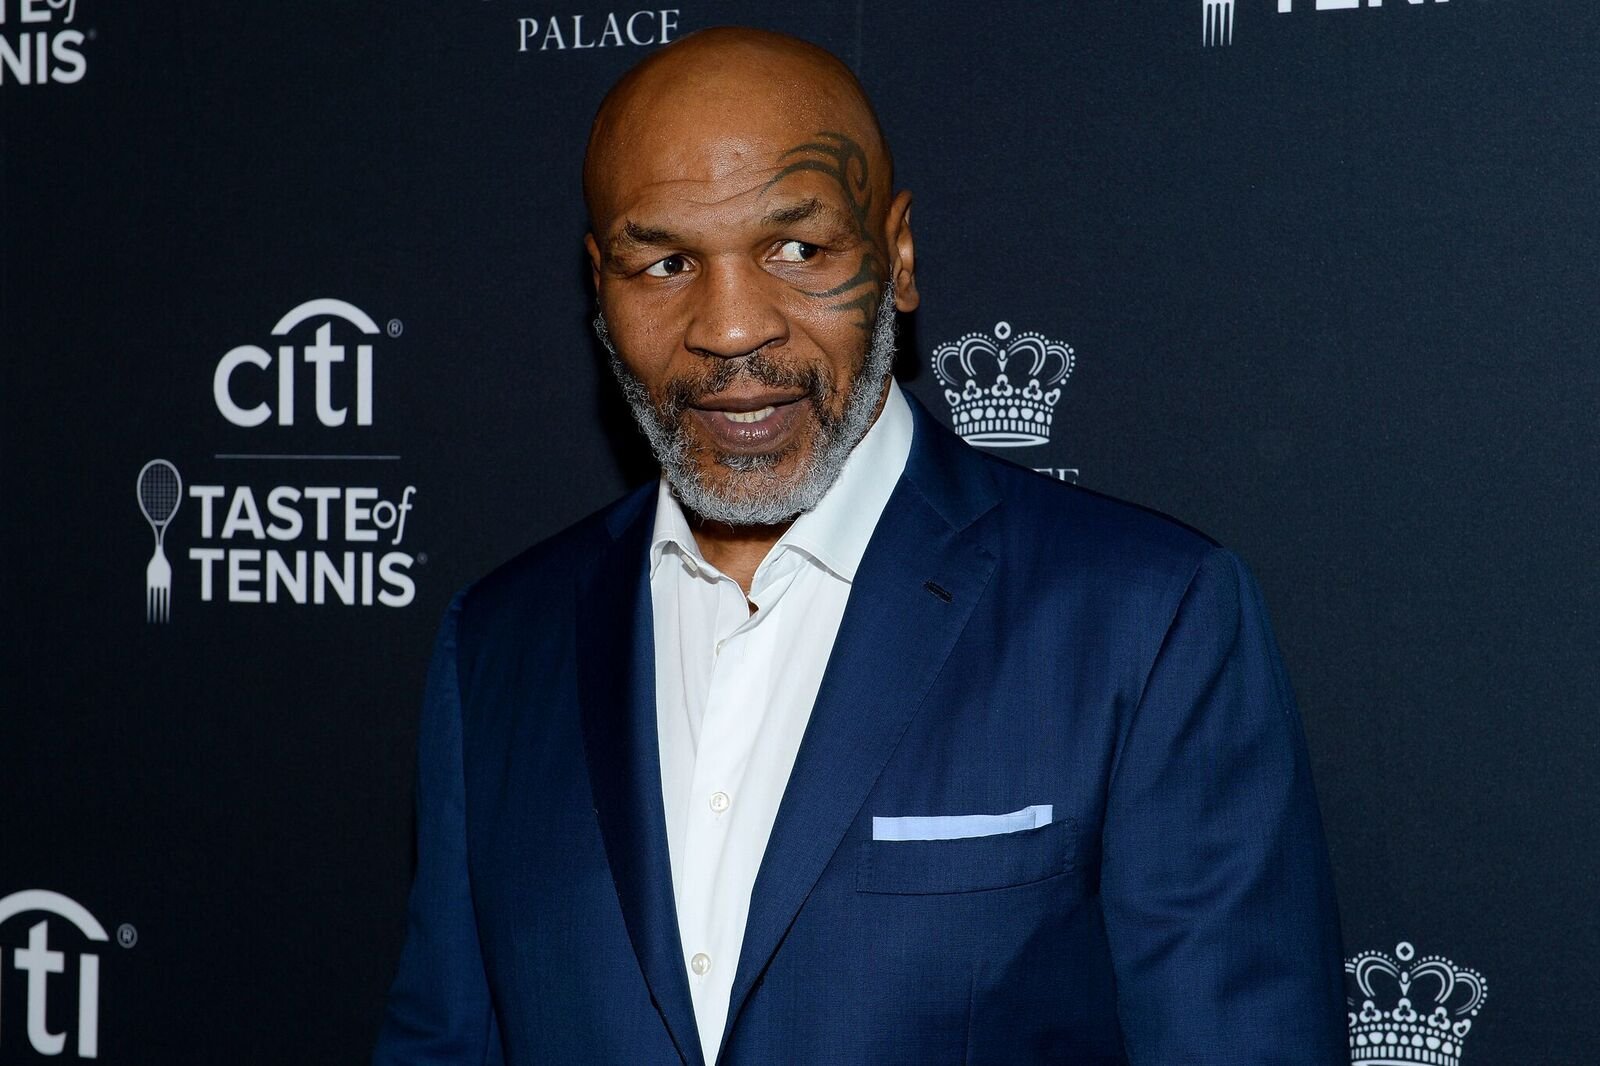 Mike Tyson attends the Citi Taste Of Tennis on August 22, 2019 in New York City. | Source: Getty Images